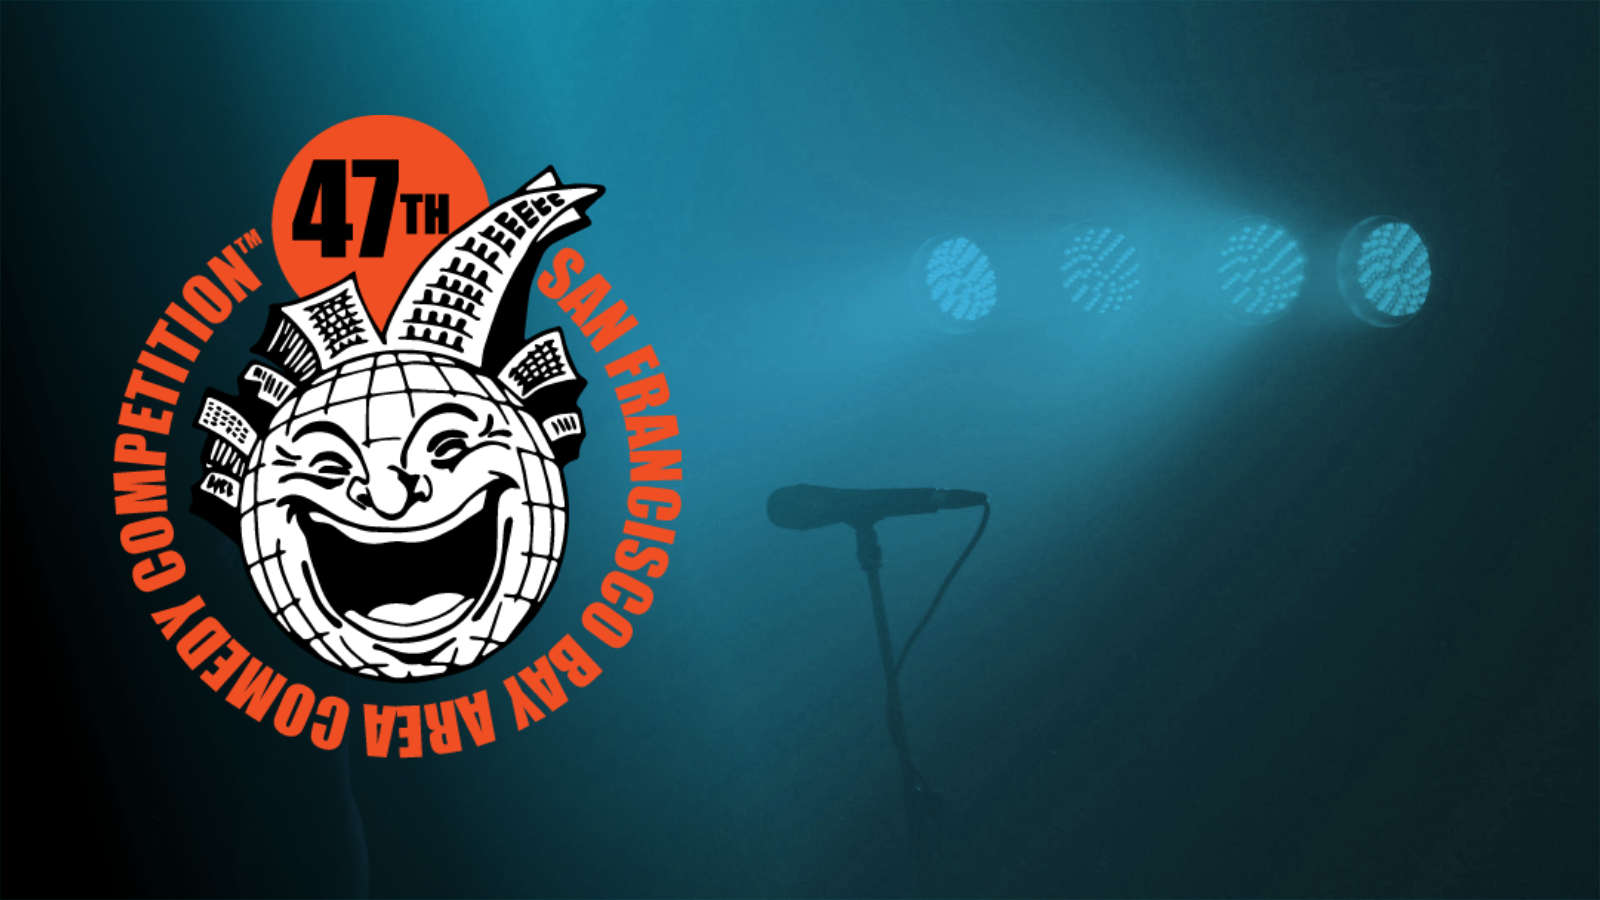 47th San Francisco Bay Area Comedy Competition Logo with microphone in background